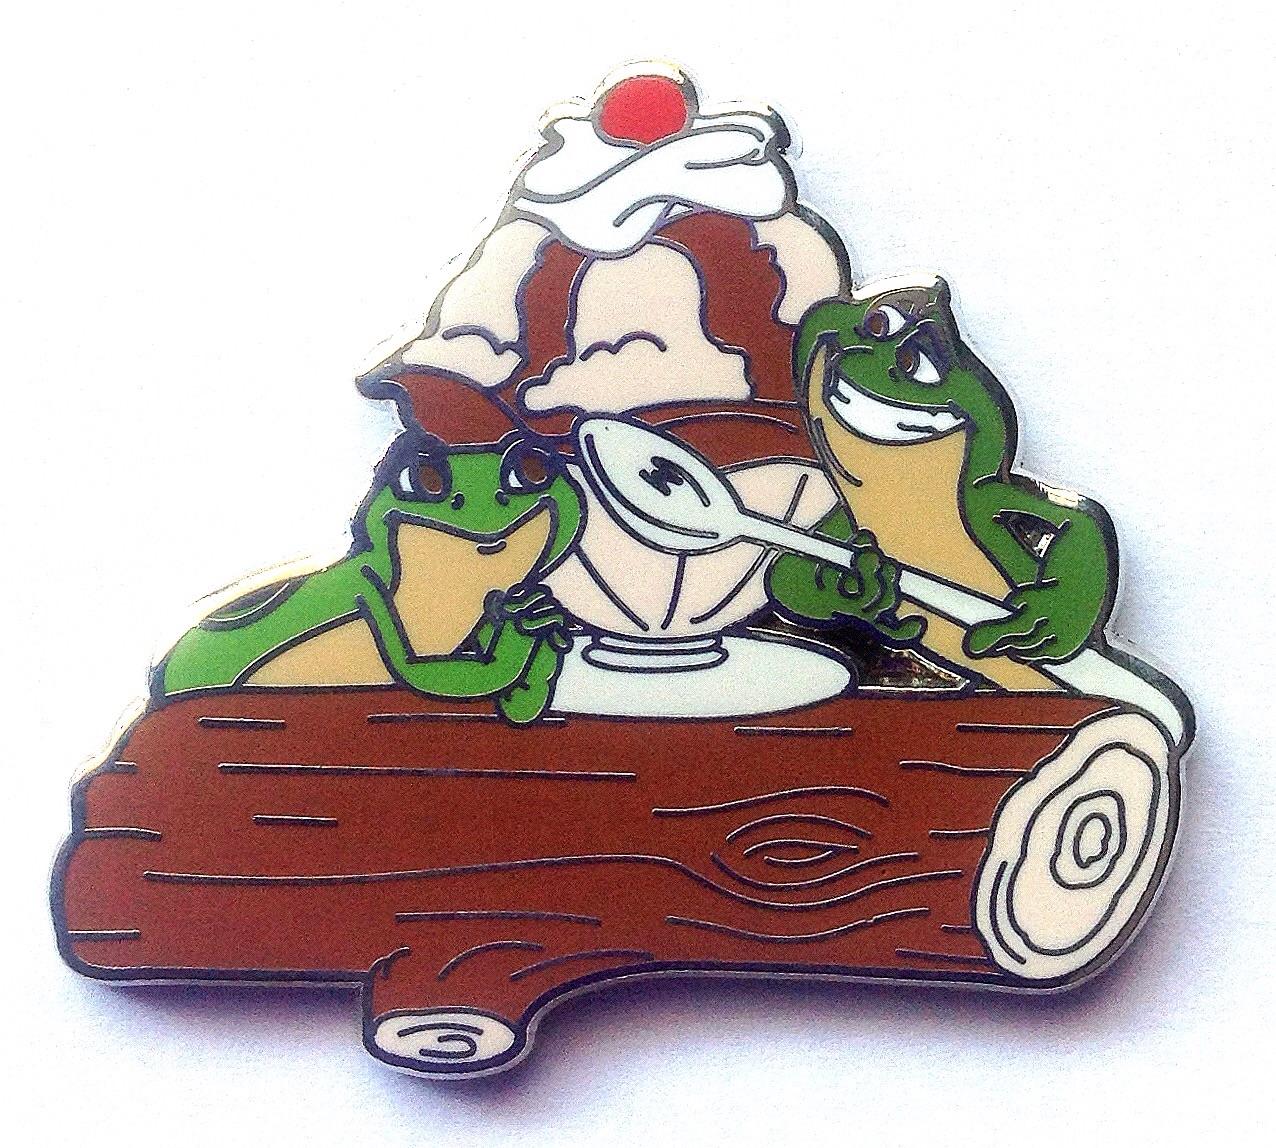 DSSH - Naveen & Tiana - Pin Trader Delight - GWP - Two Frogs on a Log Eating Ice Cream